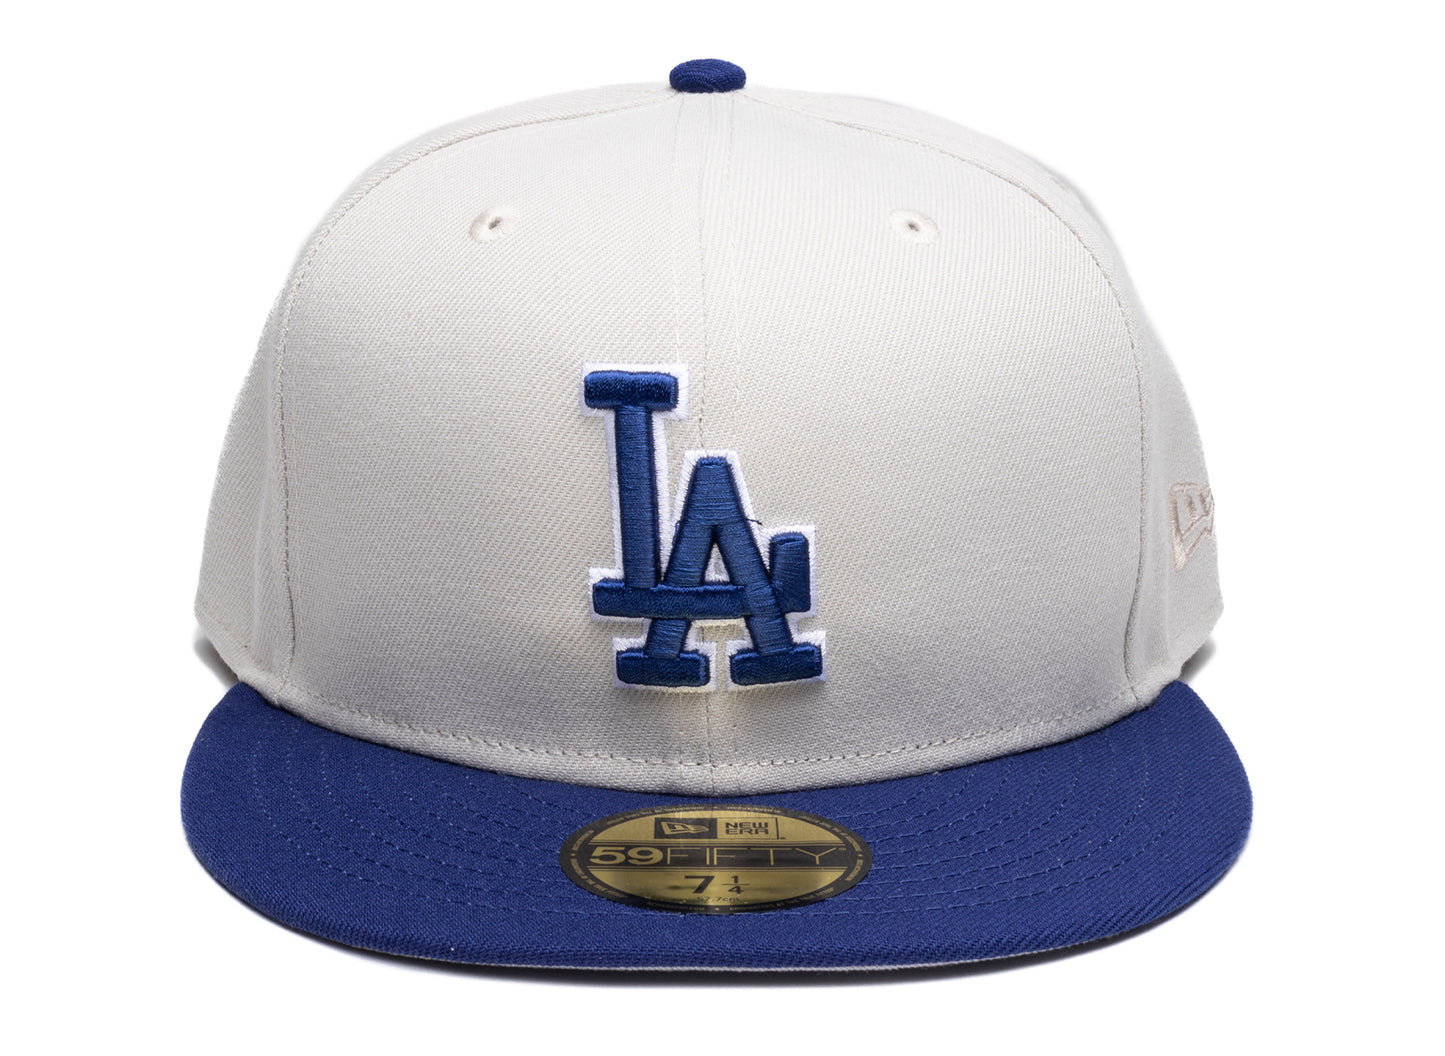 NEW ERA: BAGS AND ACCESSORIES, NEW ERA LOS ANGELES DODGERS HAT